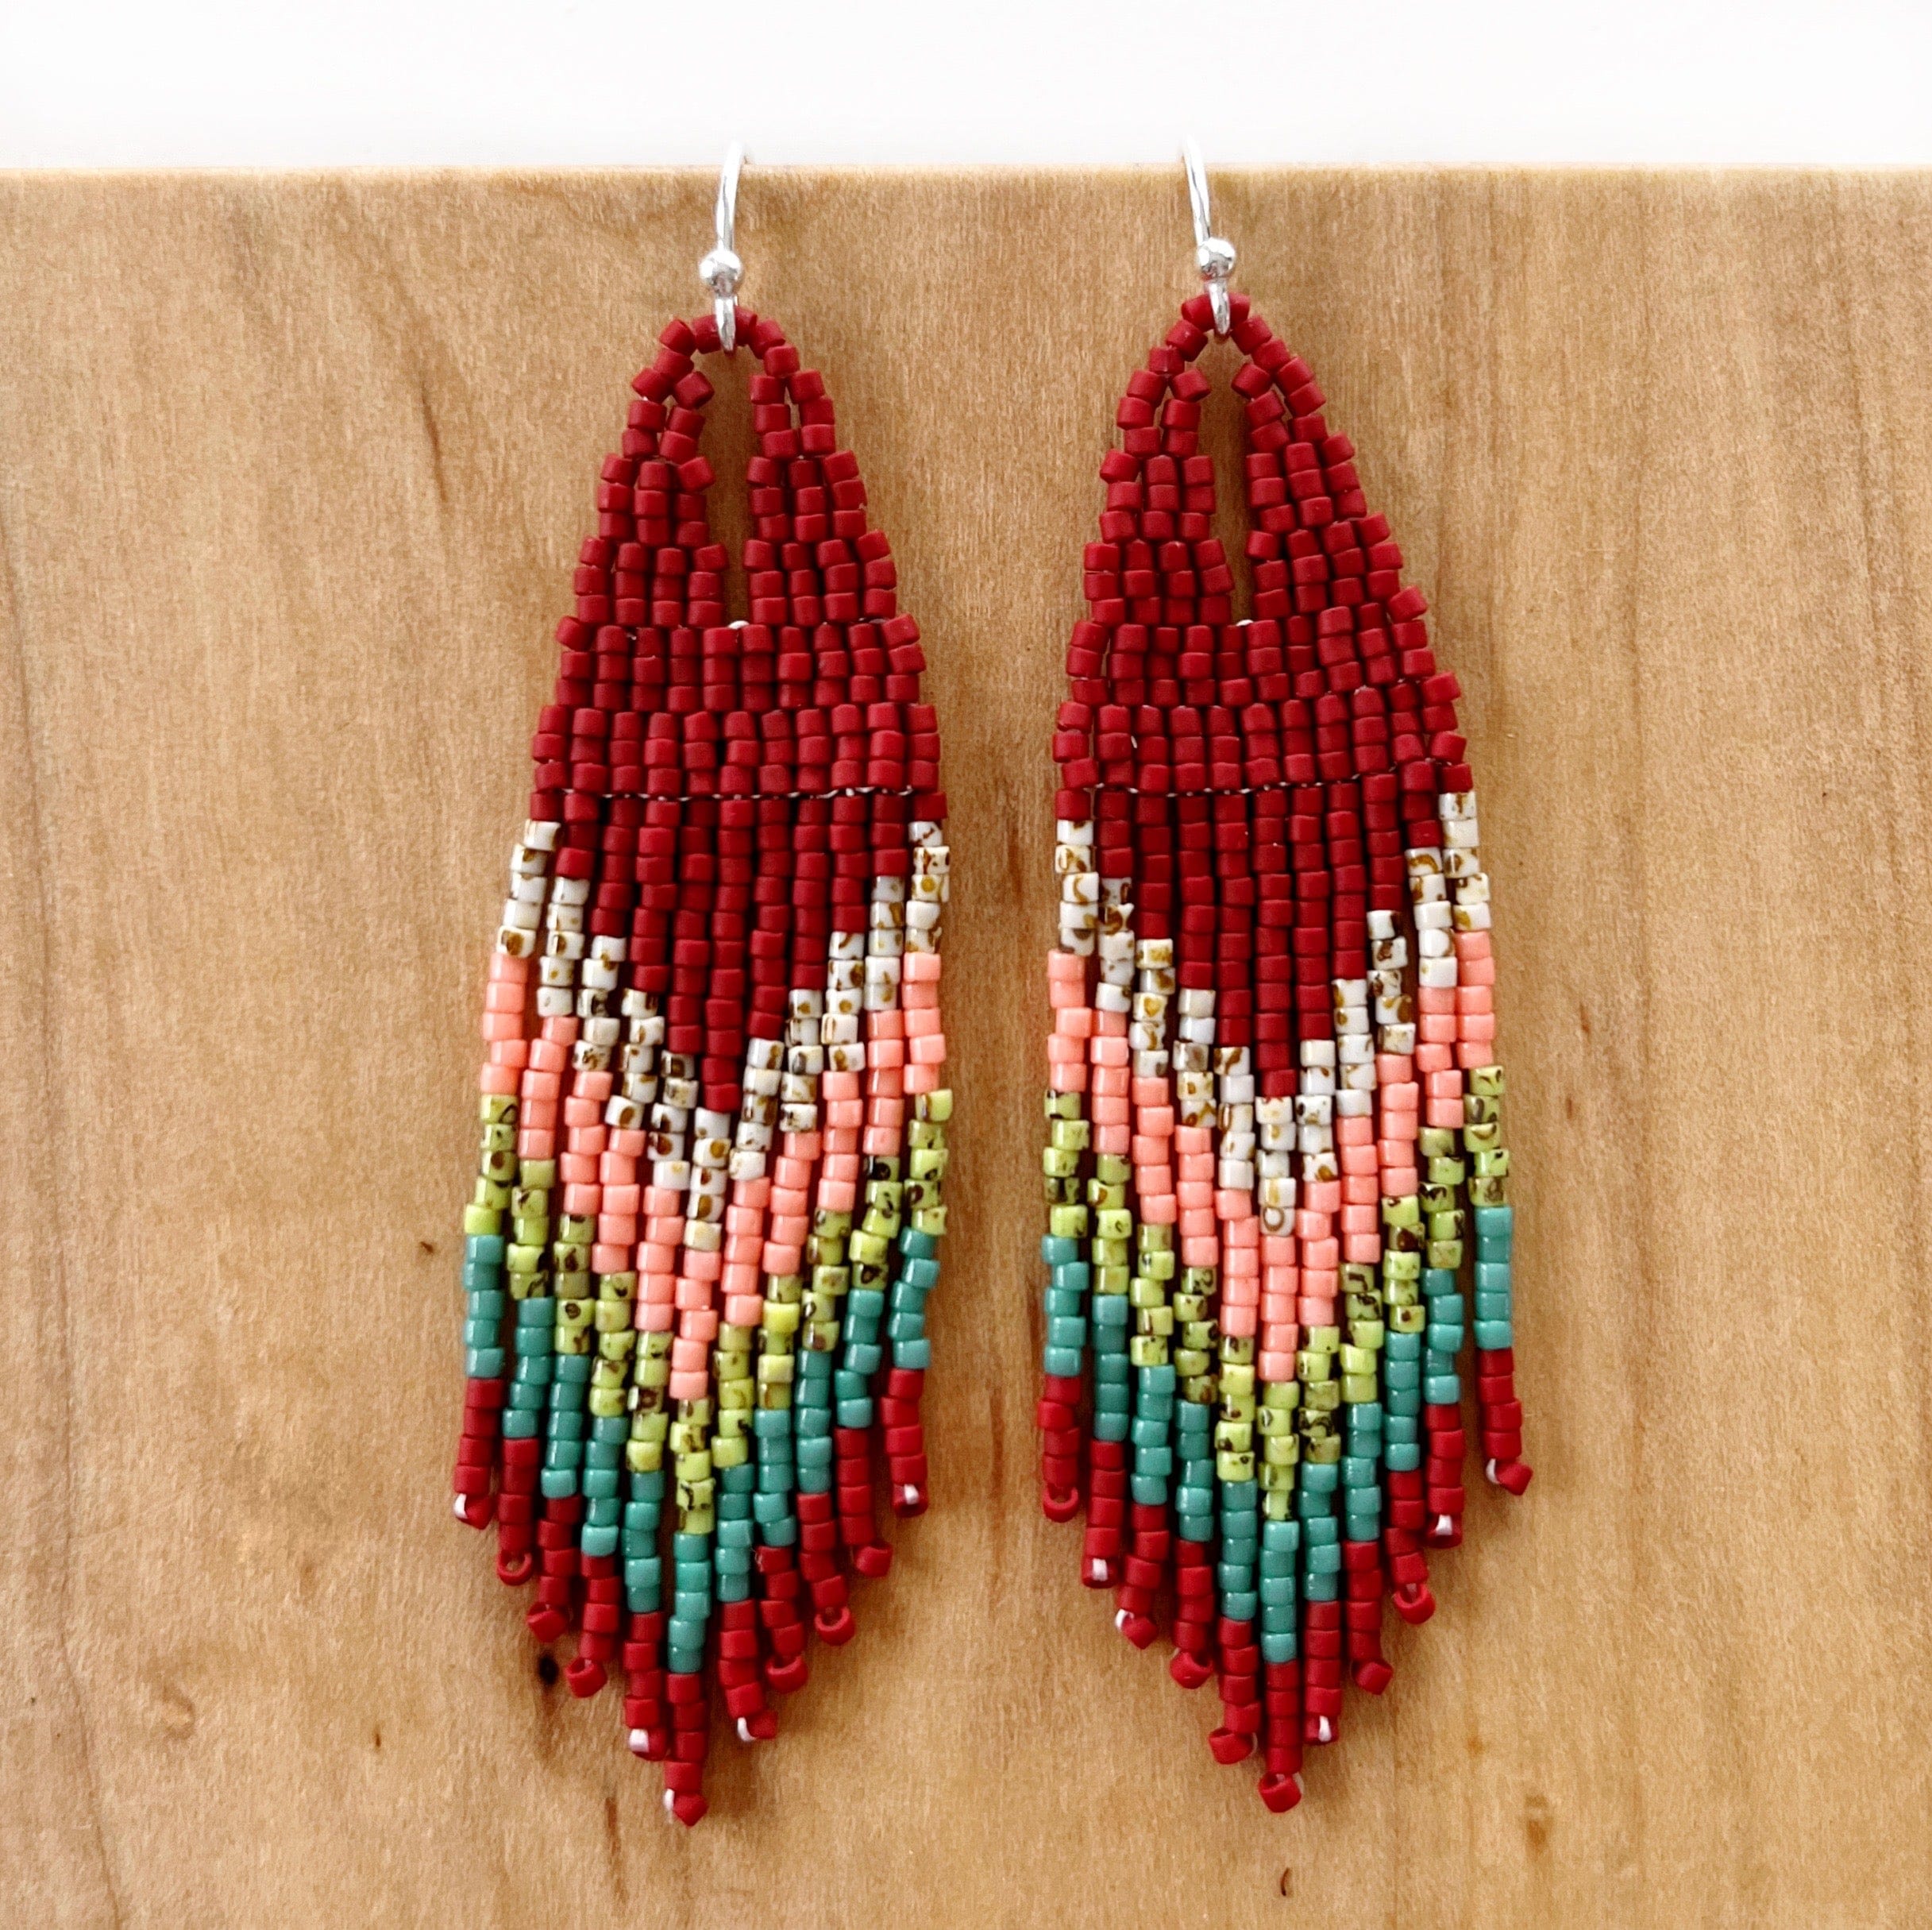 Lillie Nell Híshi Earrings in Strawberry Thief